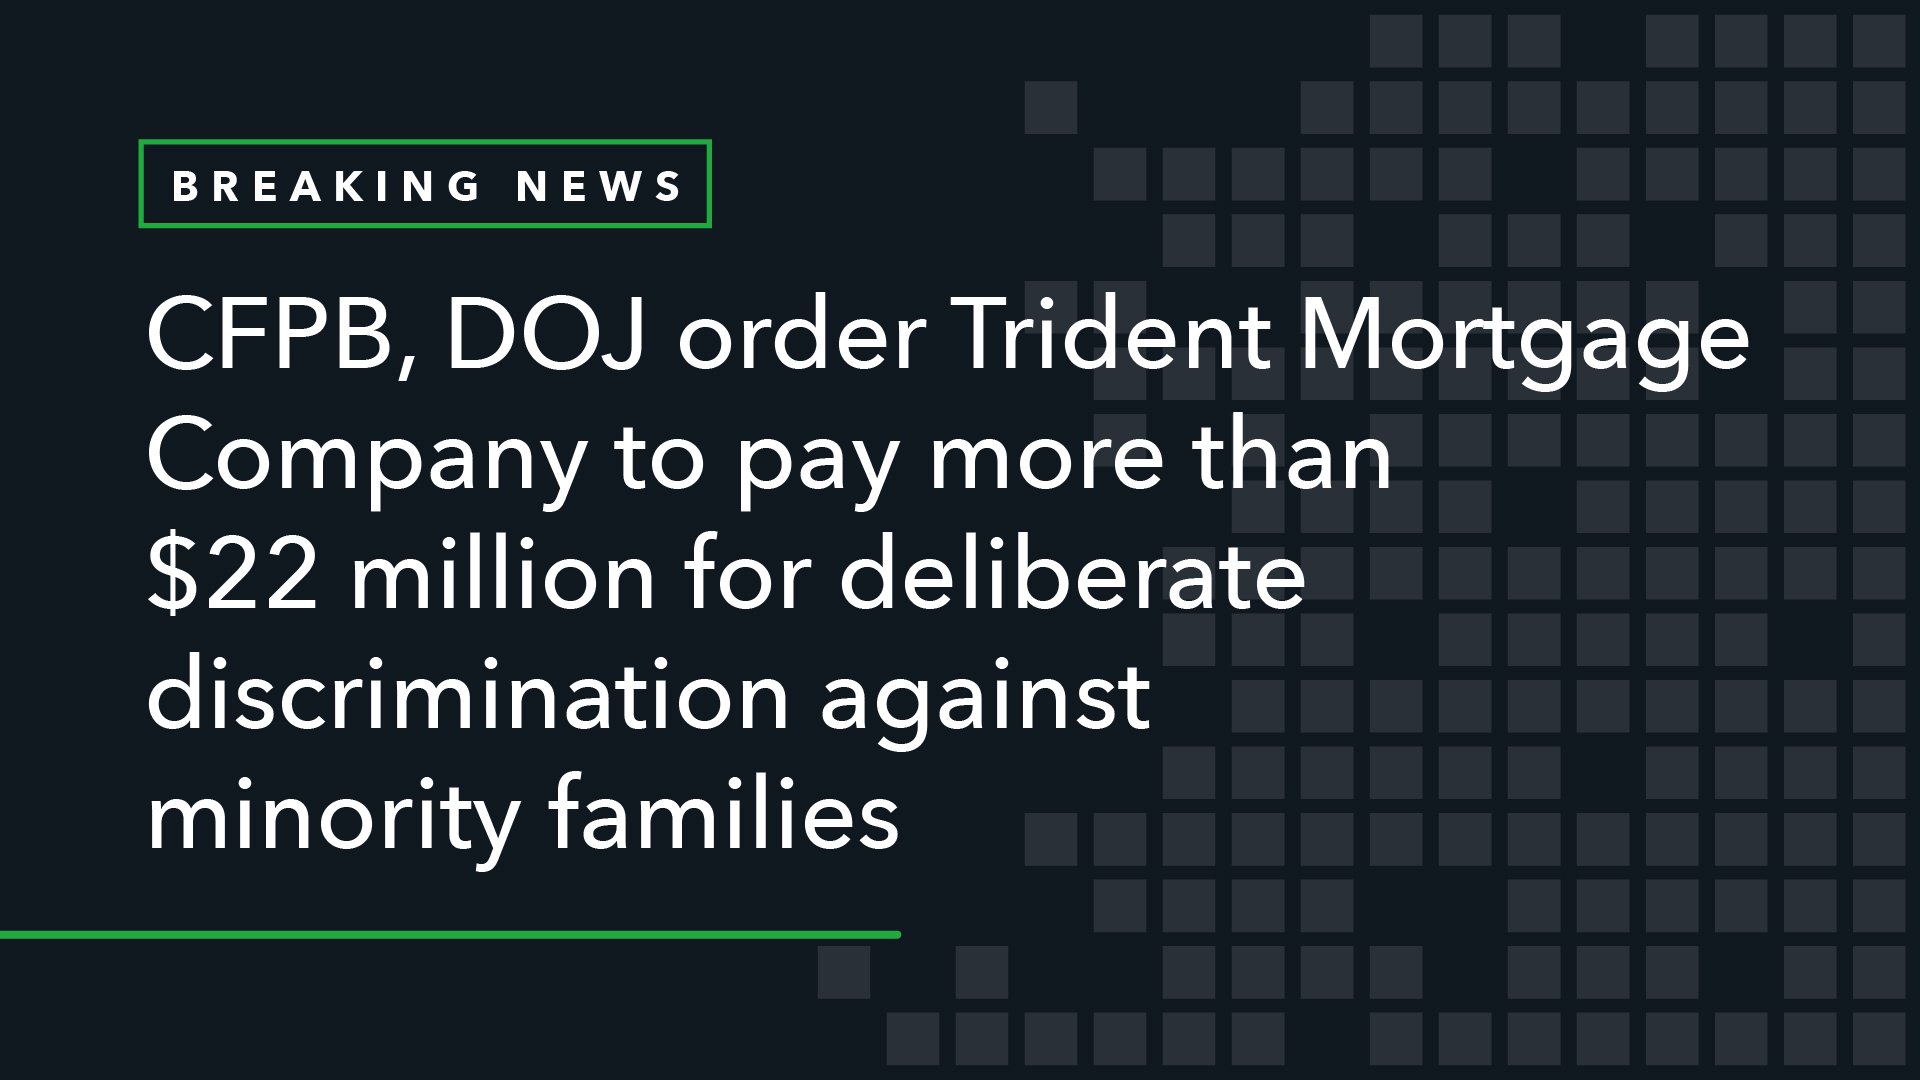 CFPB, DOJ Order Trident Mortgage Company to Pay More Than  Million for Deliberate Discrimination Against Minority Families